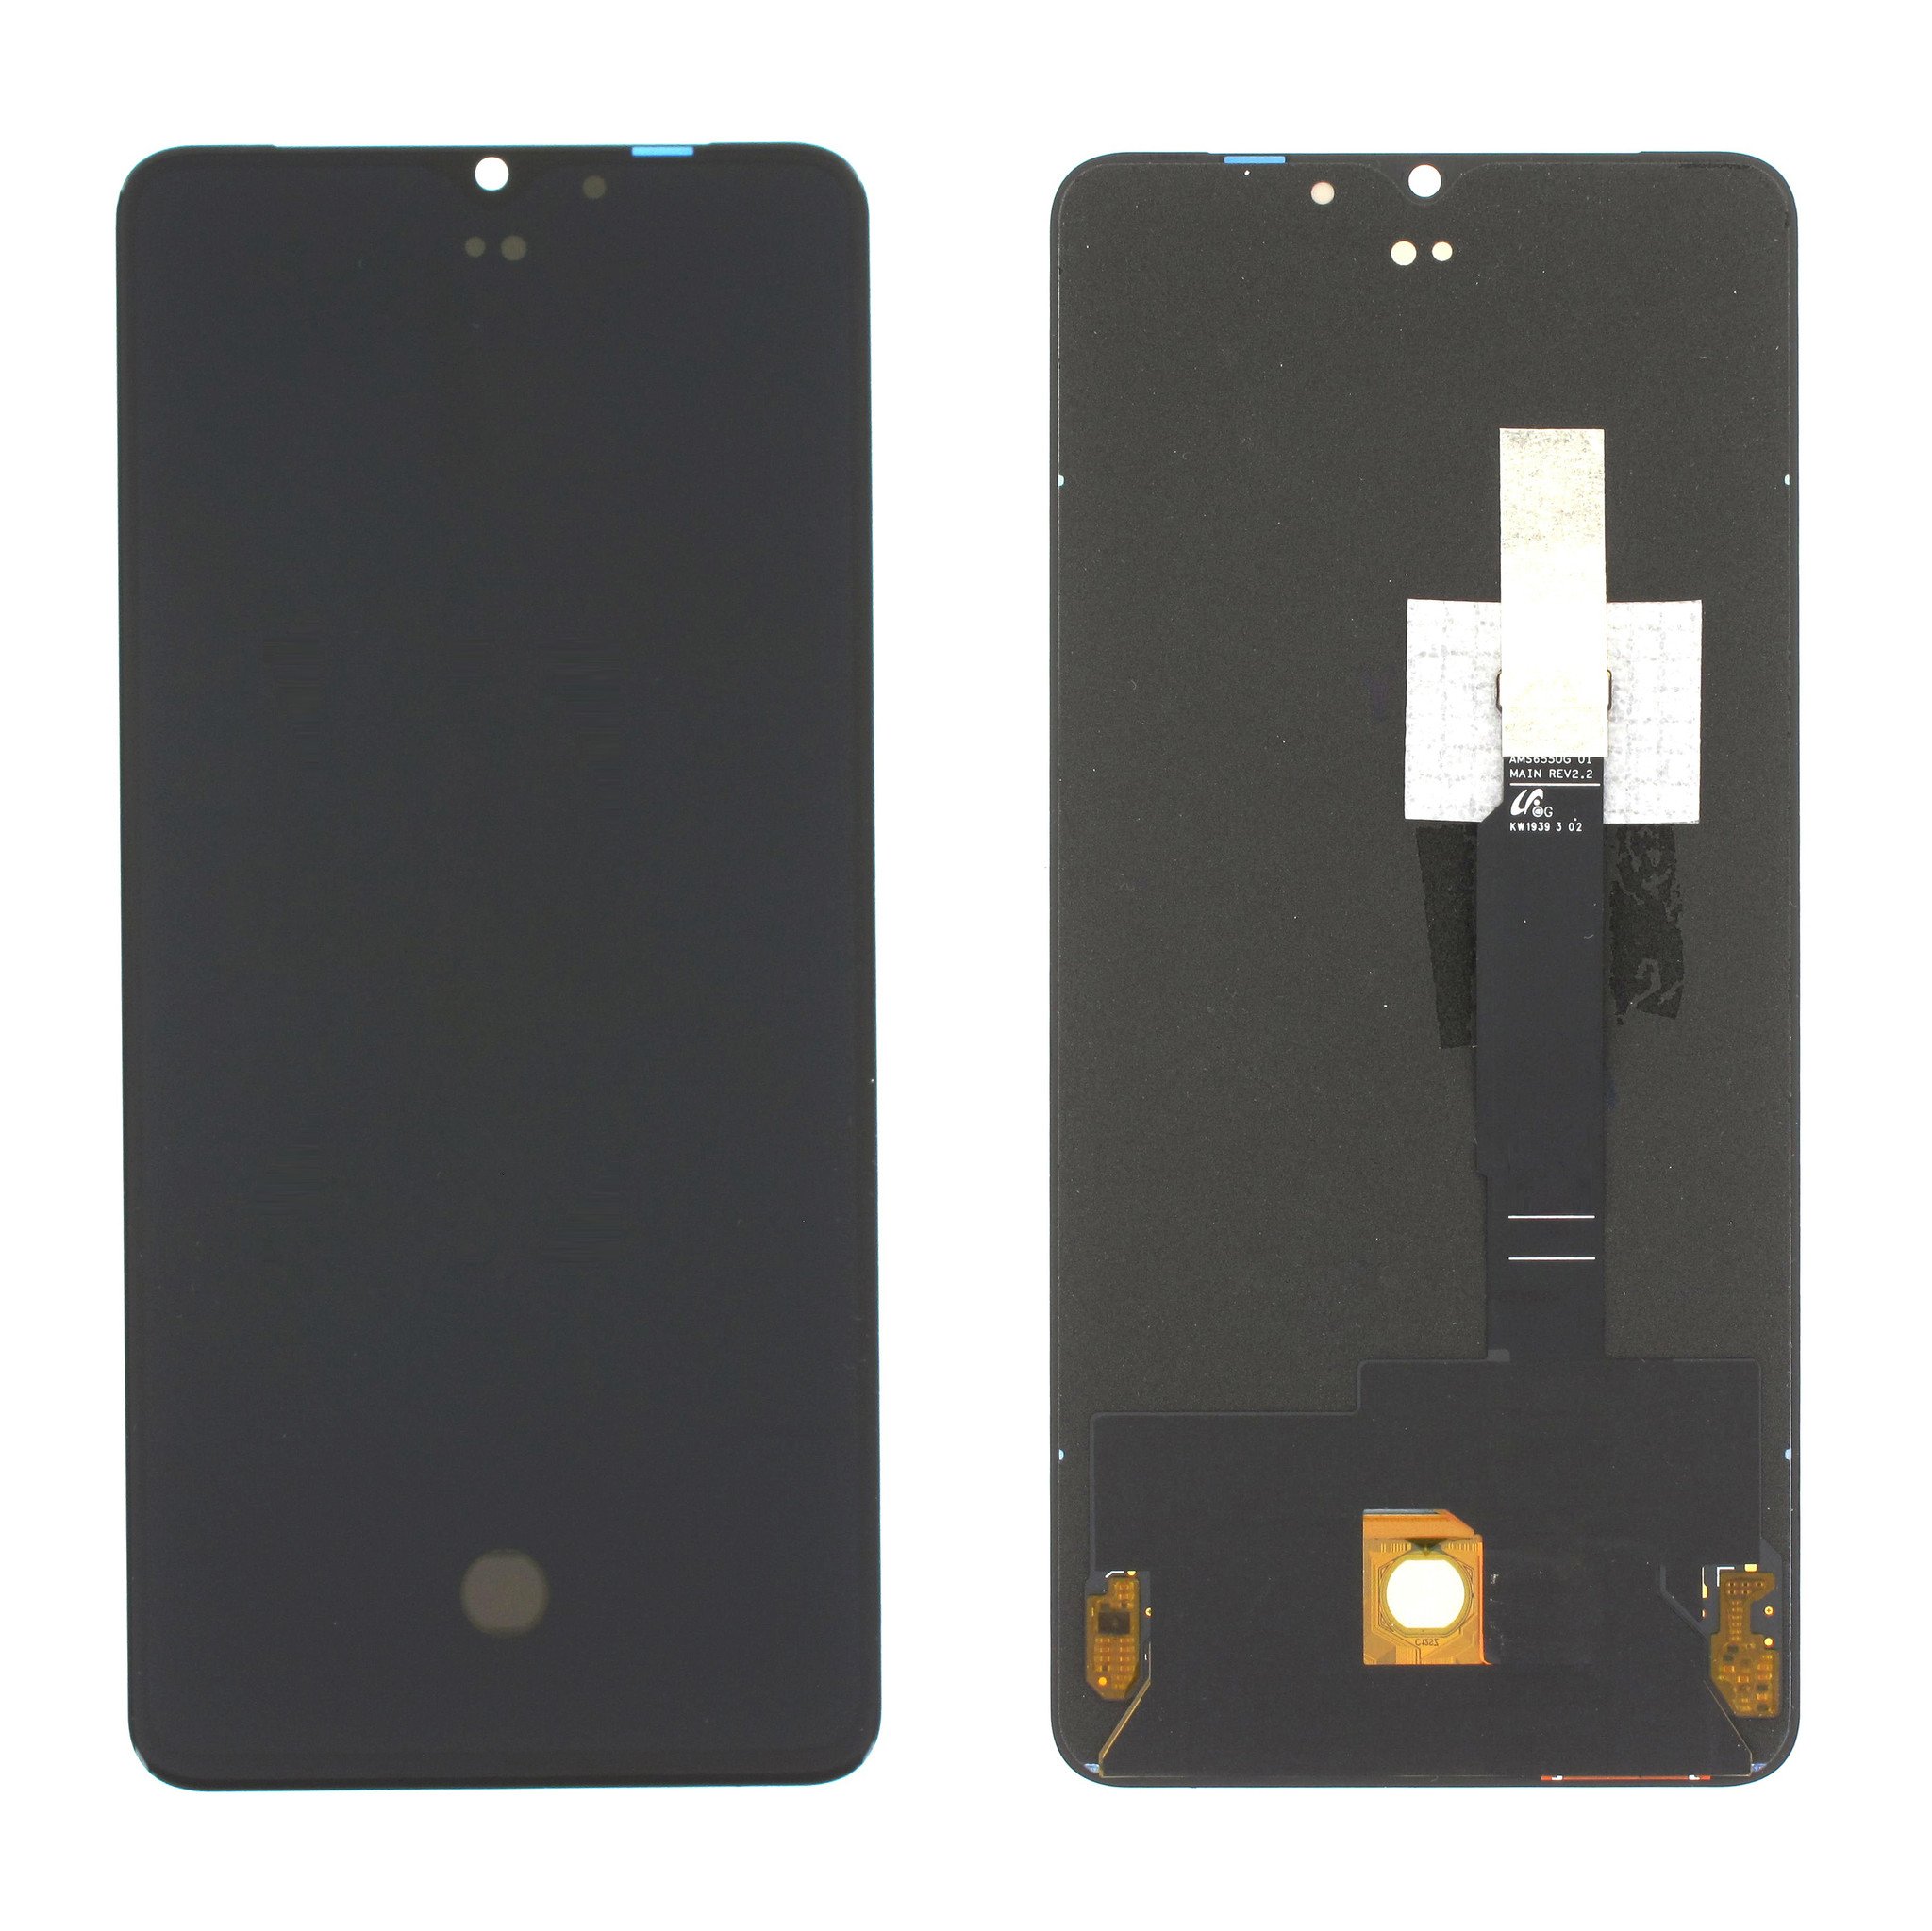 OnePlus 7T (HD1903) LCD Display, Zwart, Excl. frame, OP7T-LCD-EX-BL